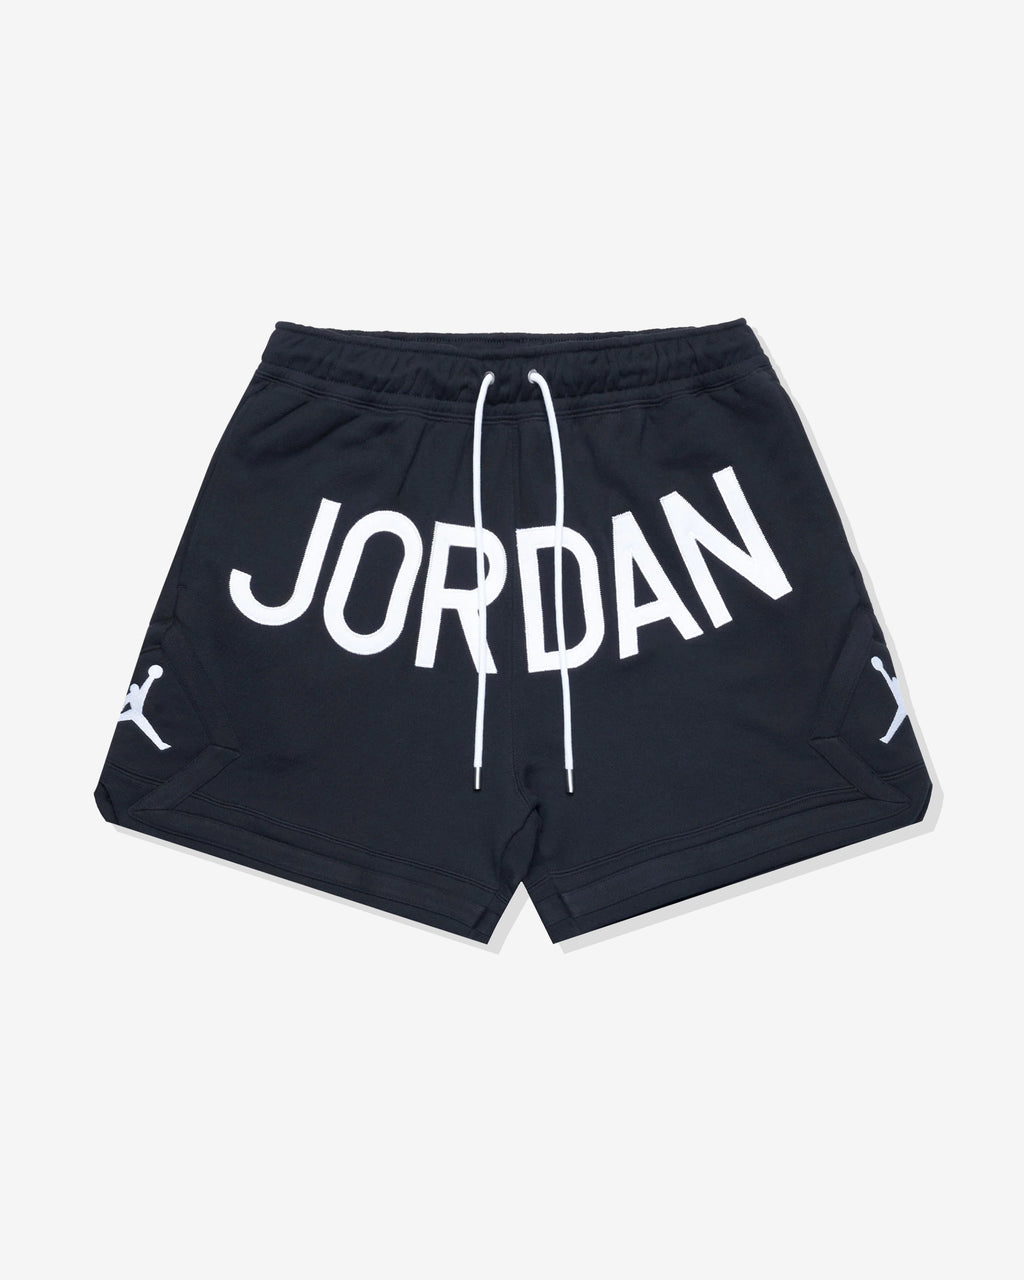 Jordan – Tagged shorts – Undefeated